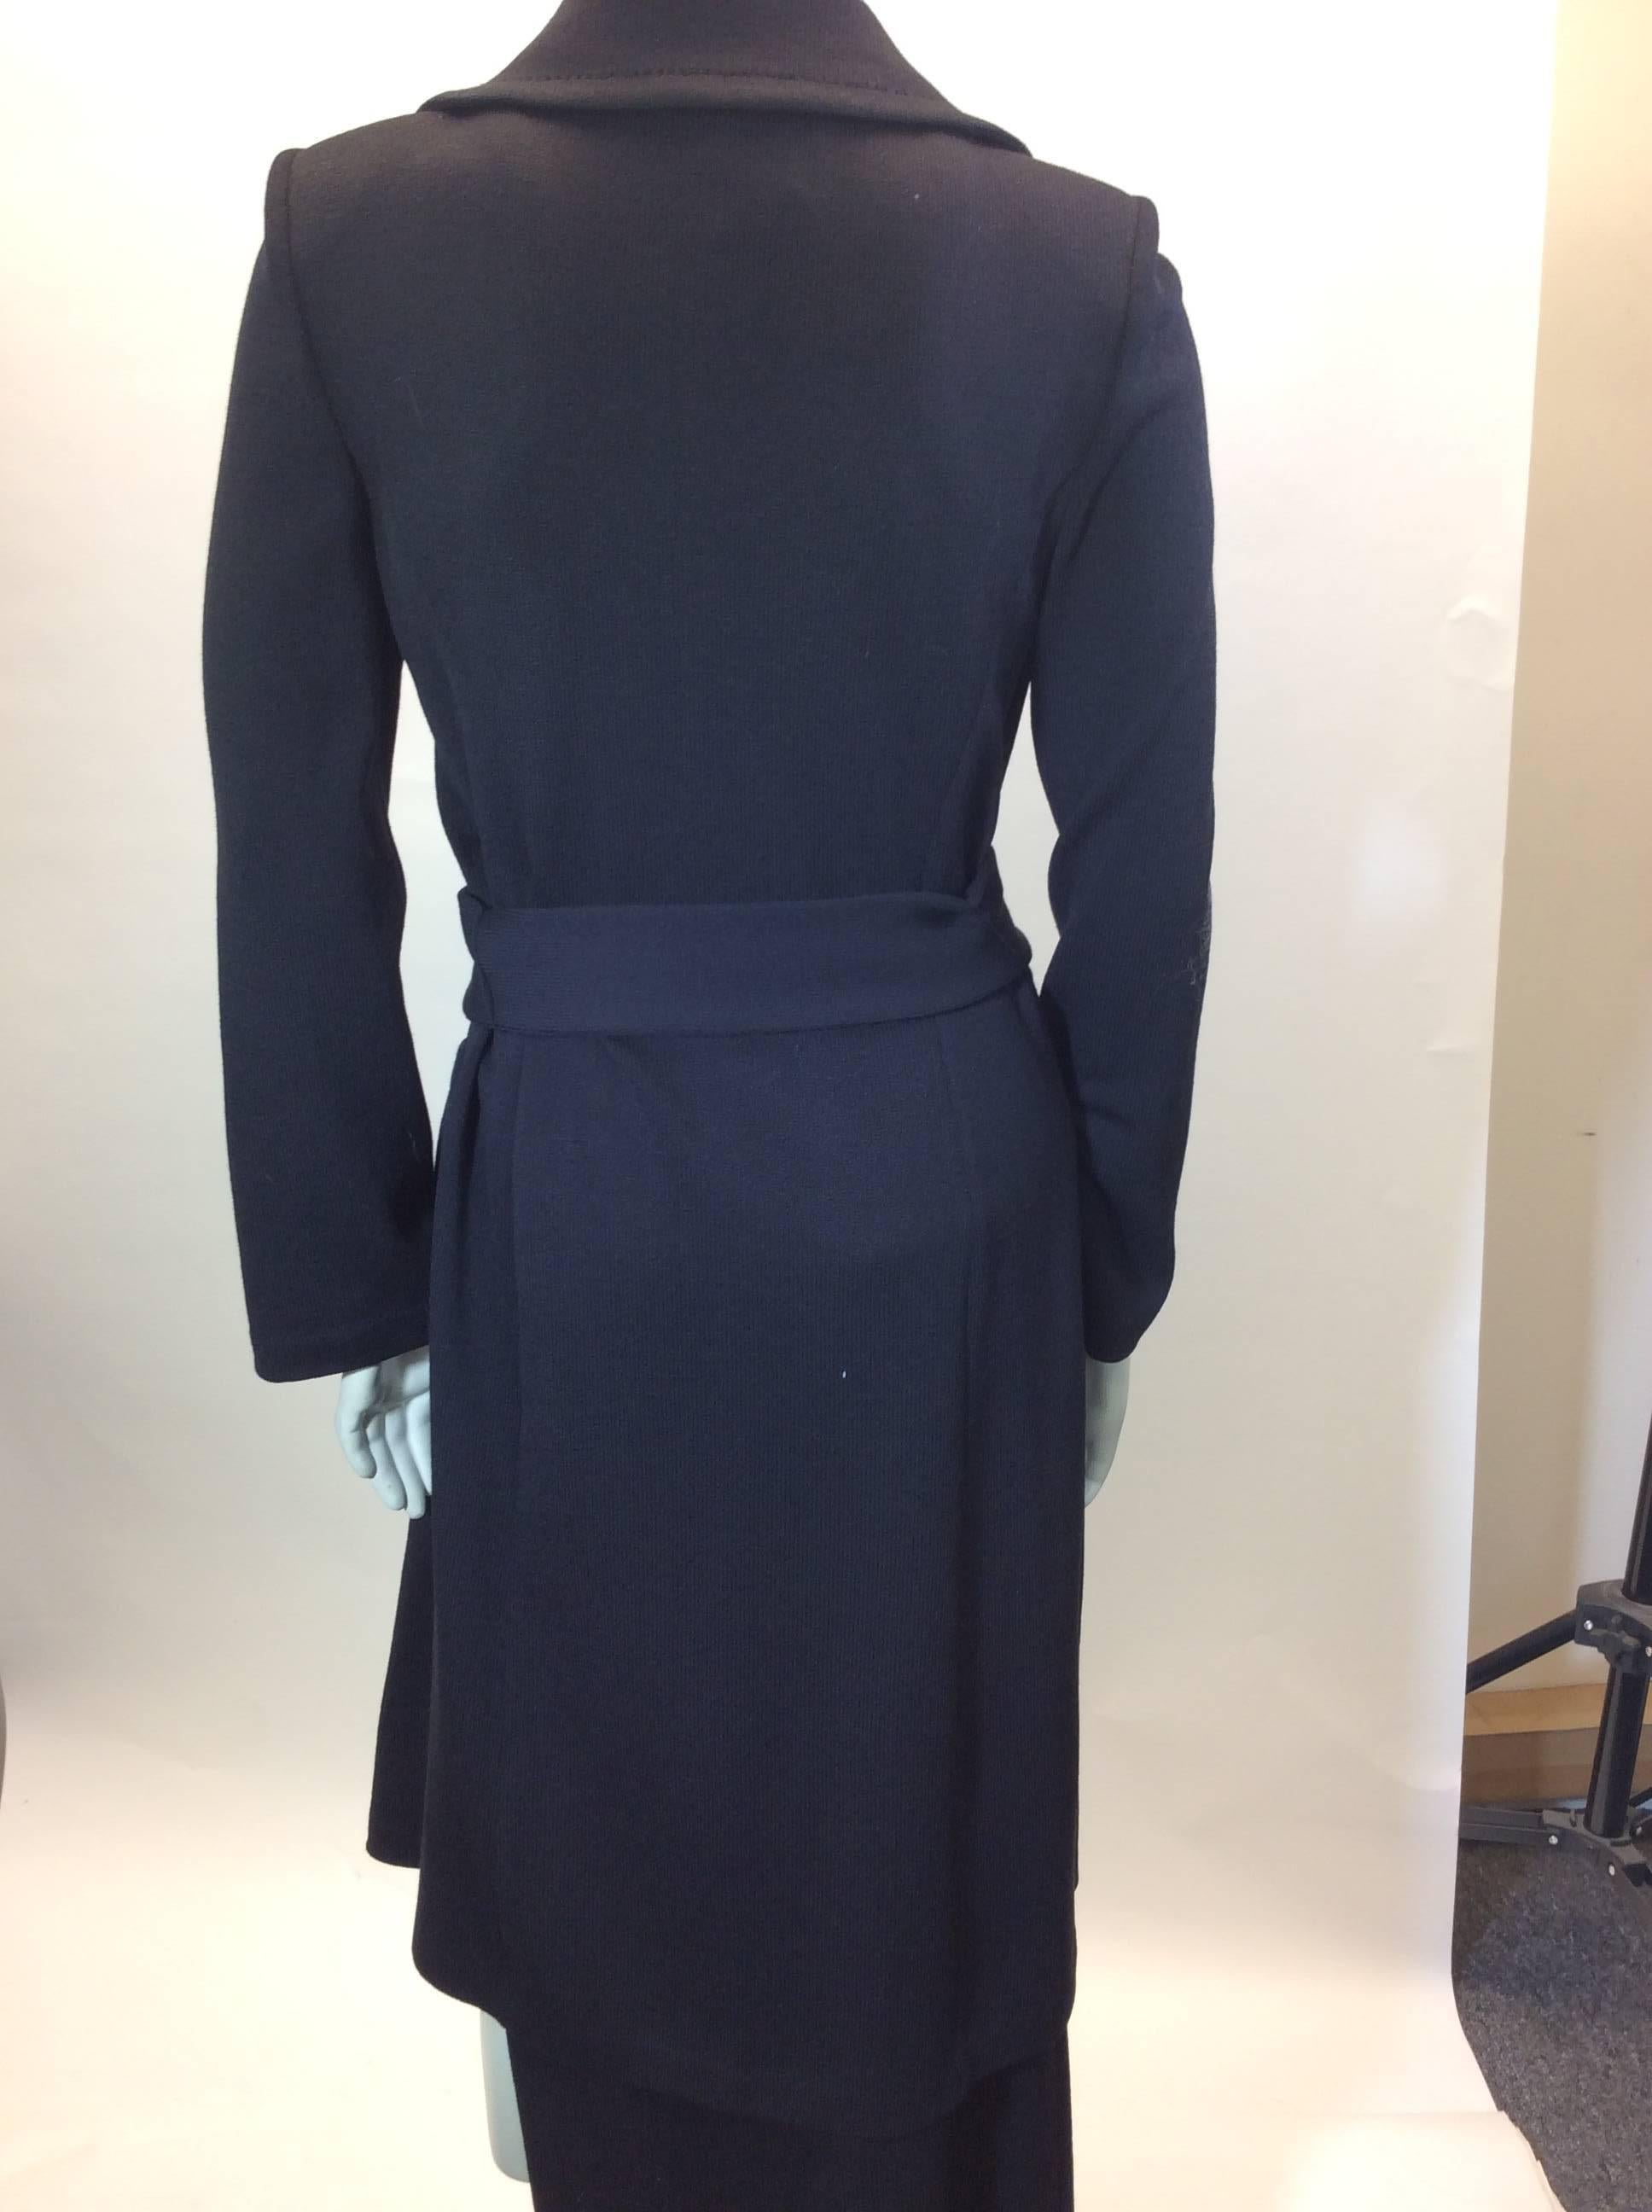 St John Black Knit Skirt set  In Excellent Condition For Sale In Narberth, PA